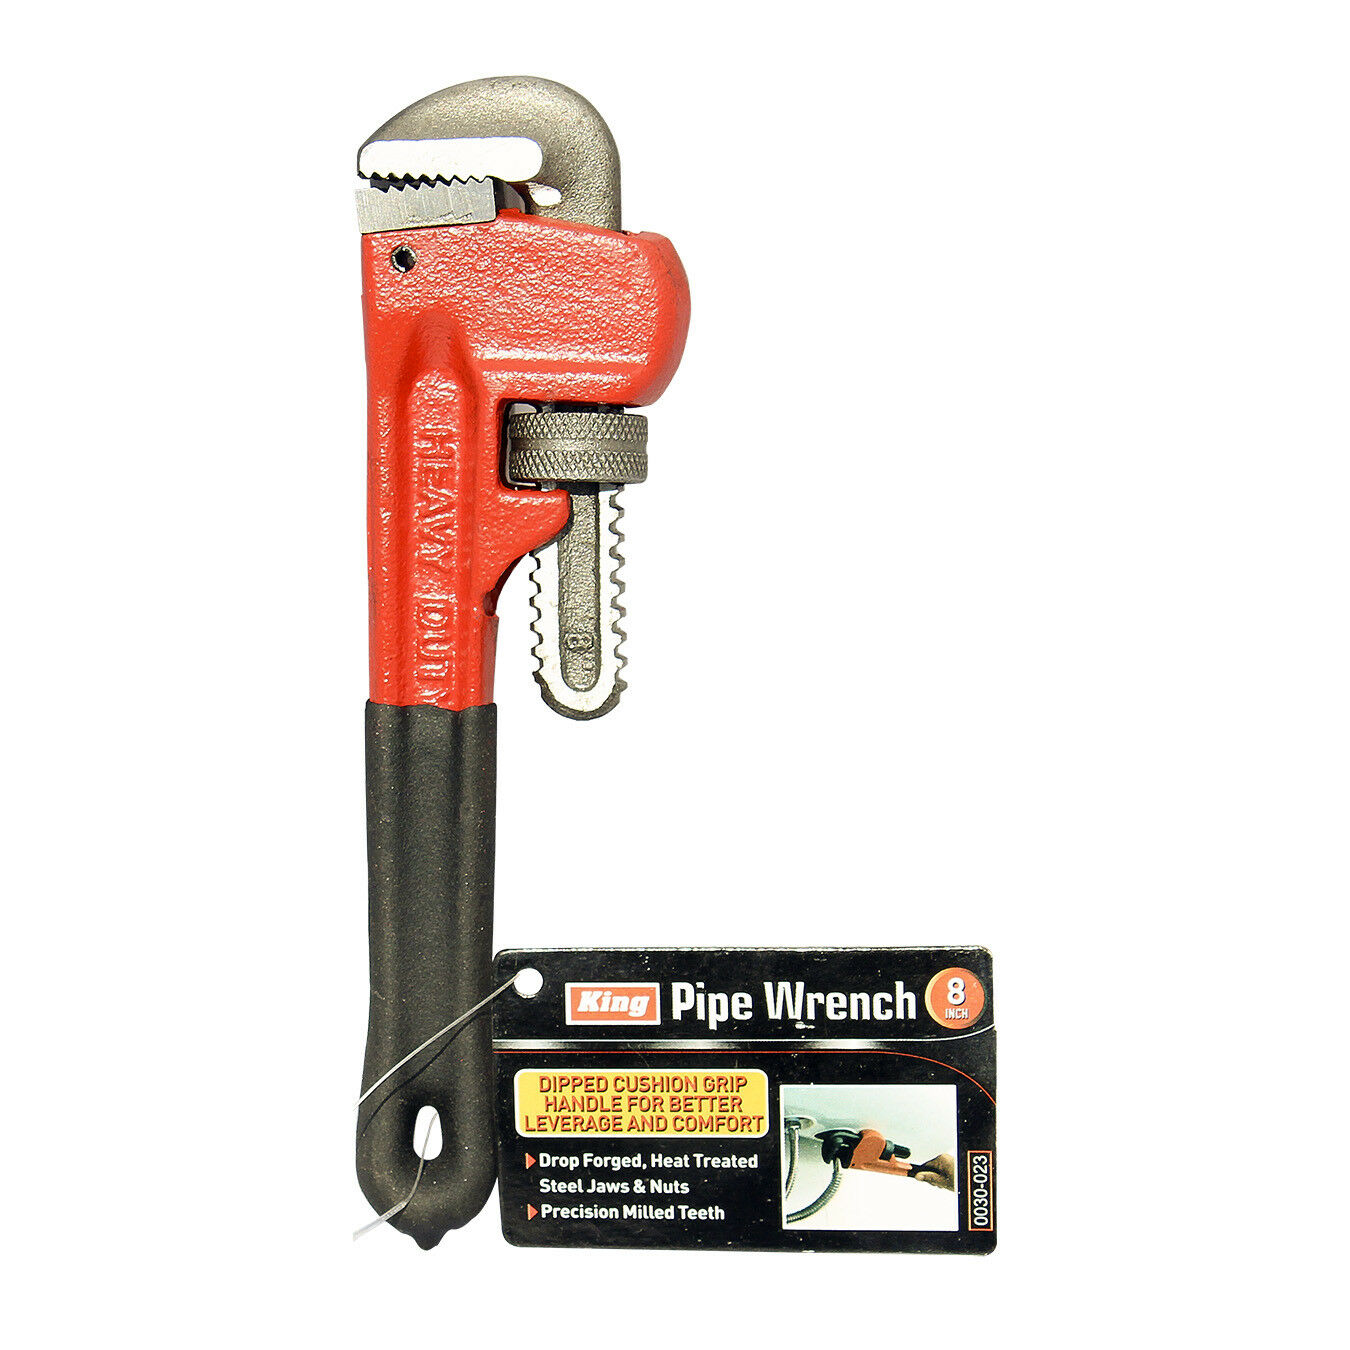 8" Pipe Wrench, Steel Heavy Duty And Adjustable Spanner, Dipped Handle